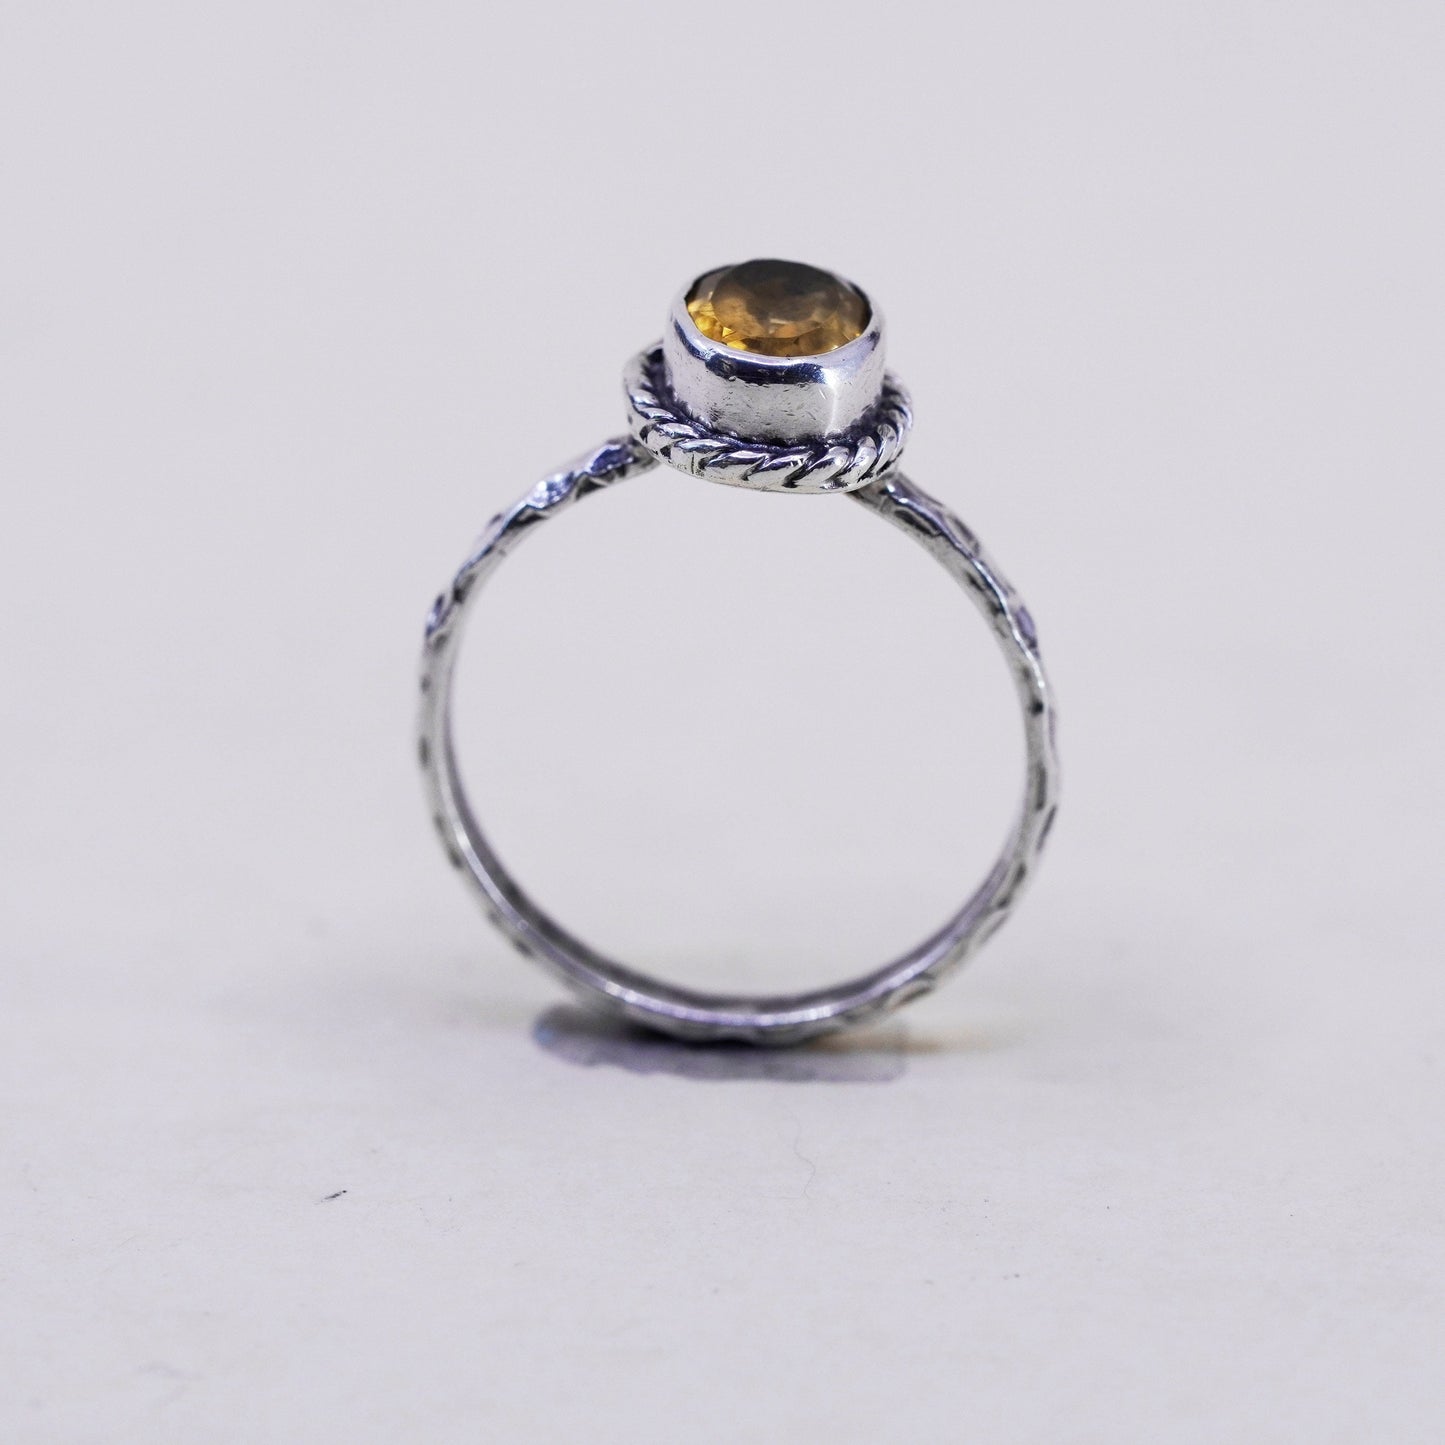 Size 8.25, vintage Sterling silver handmade ring, stackable 925 band citrine